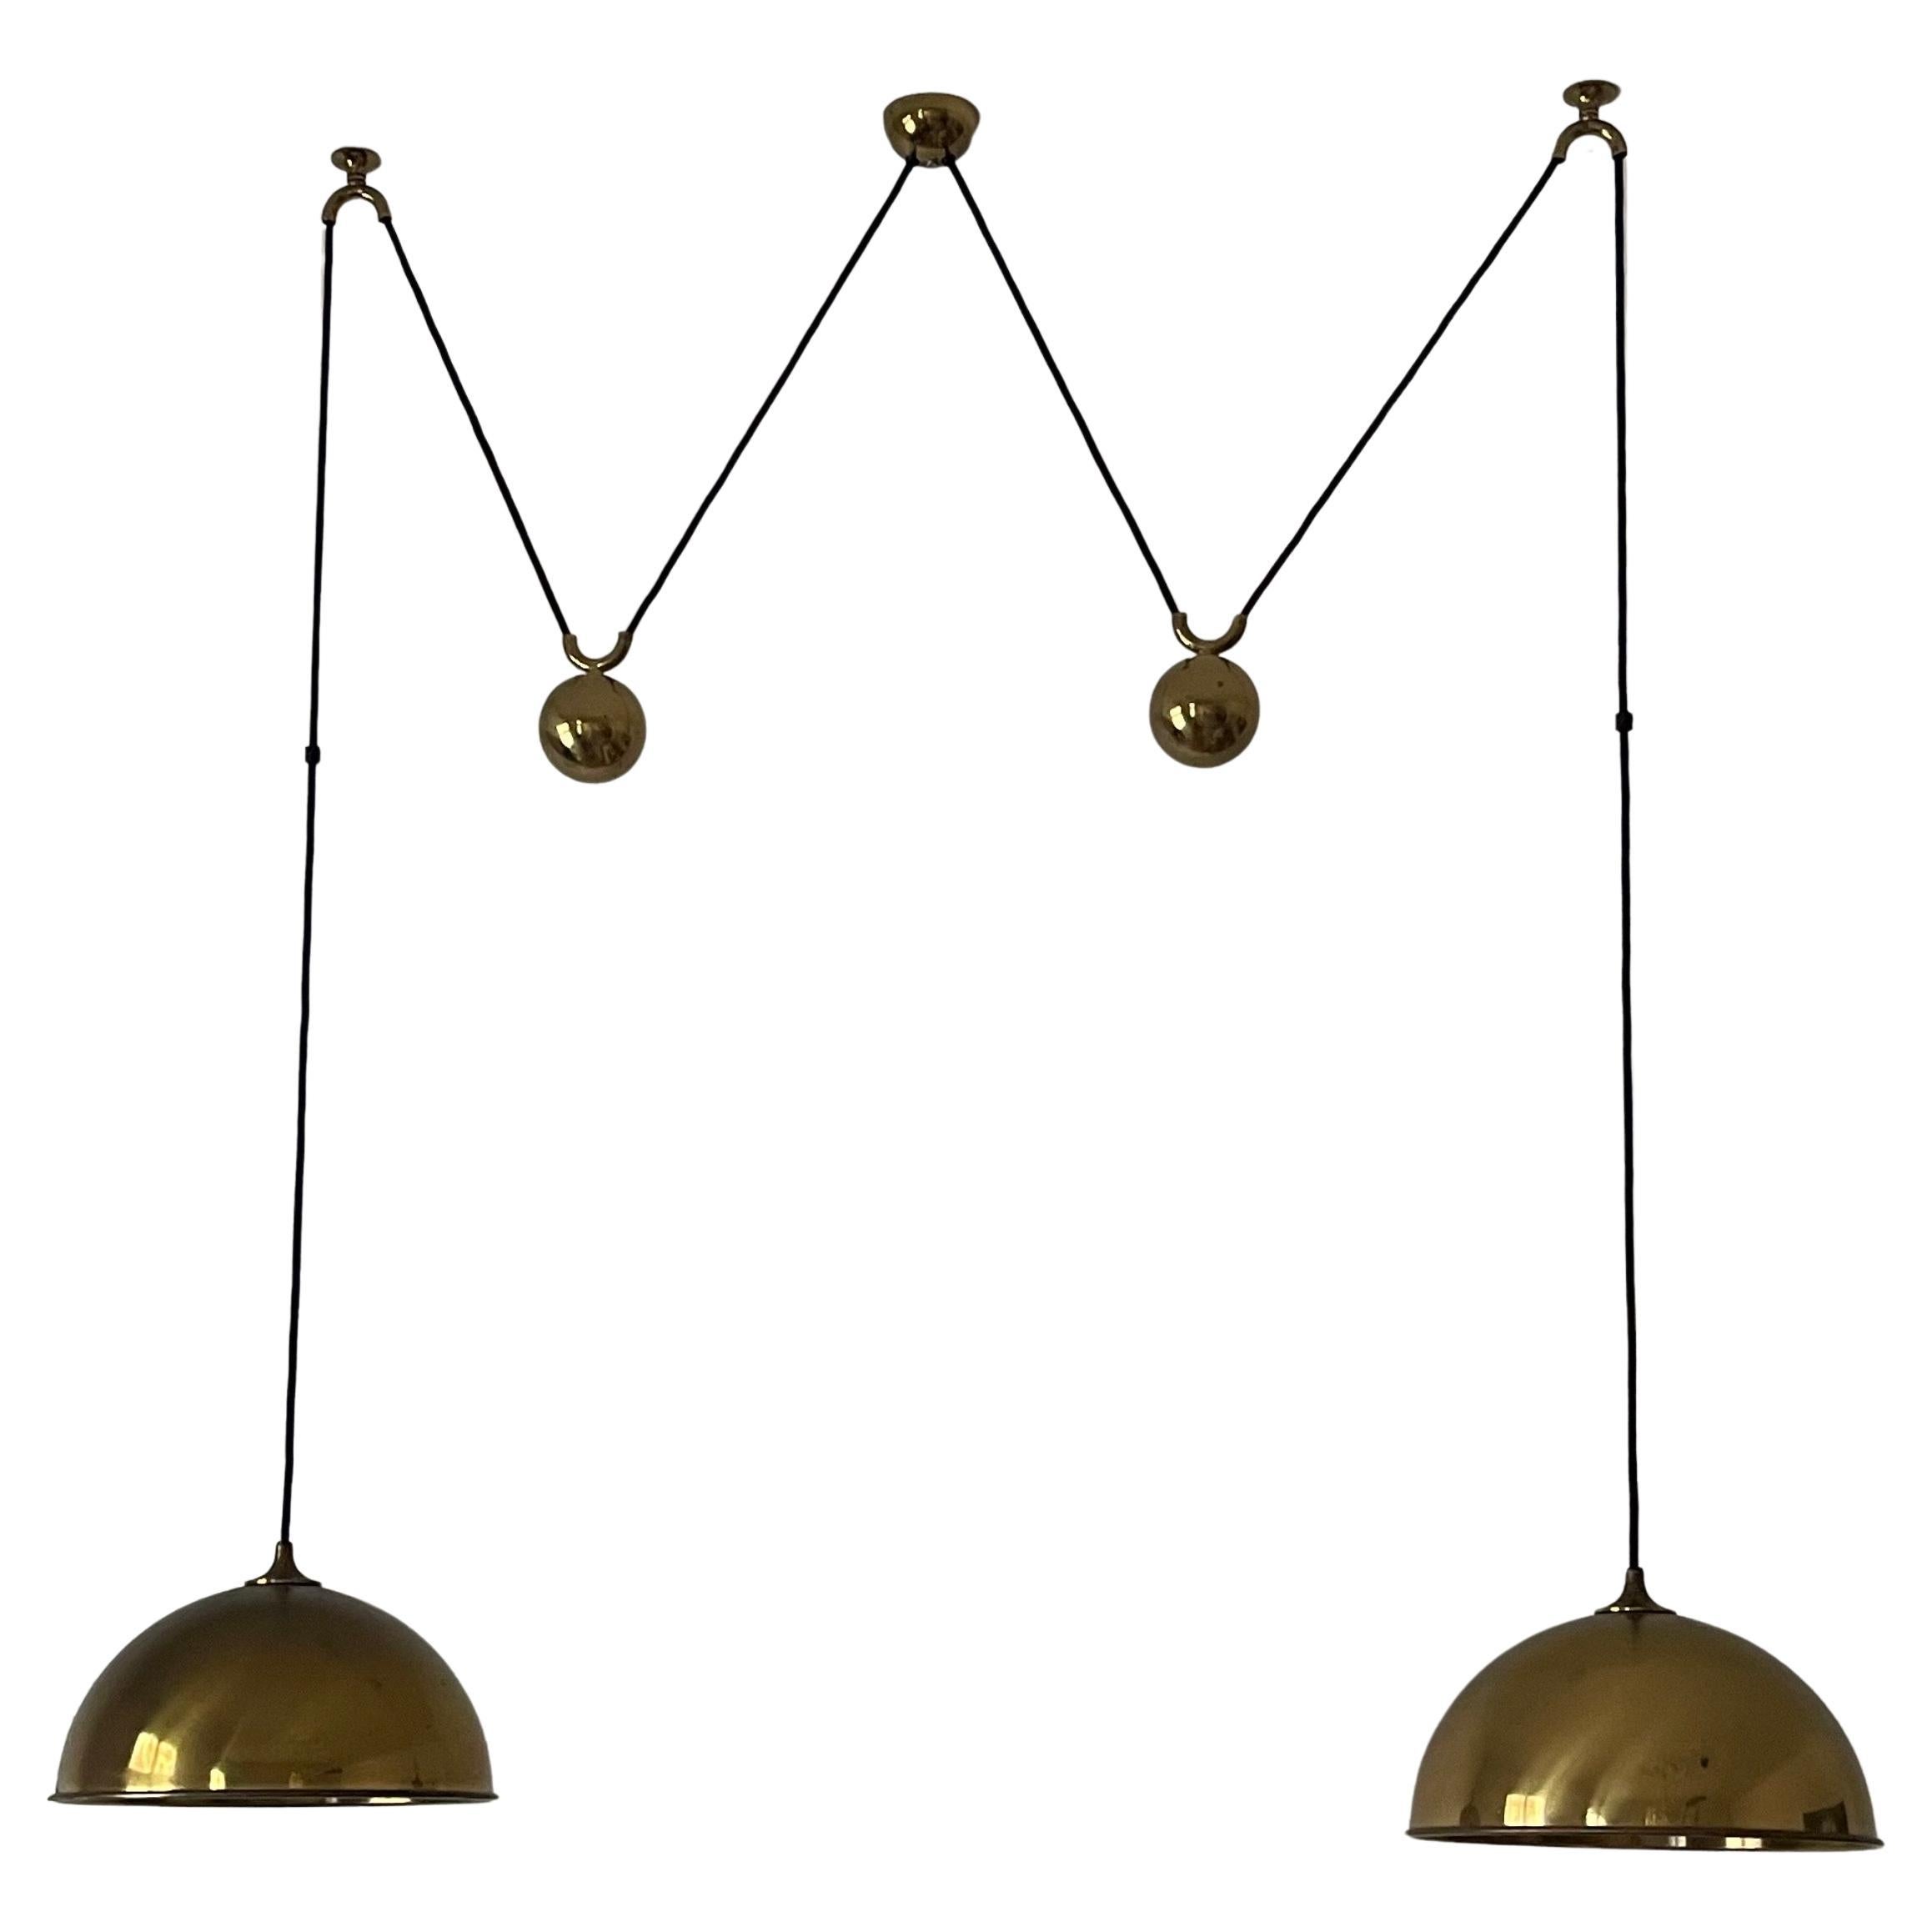 Double polished brass counterbalance pendant by Florian Schulz. Two brass pendants suspended, each with their own brass ball counter balance pulley system. One centre canopy supports both pendants. Each light is adjustable in height without